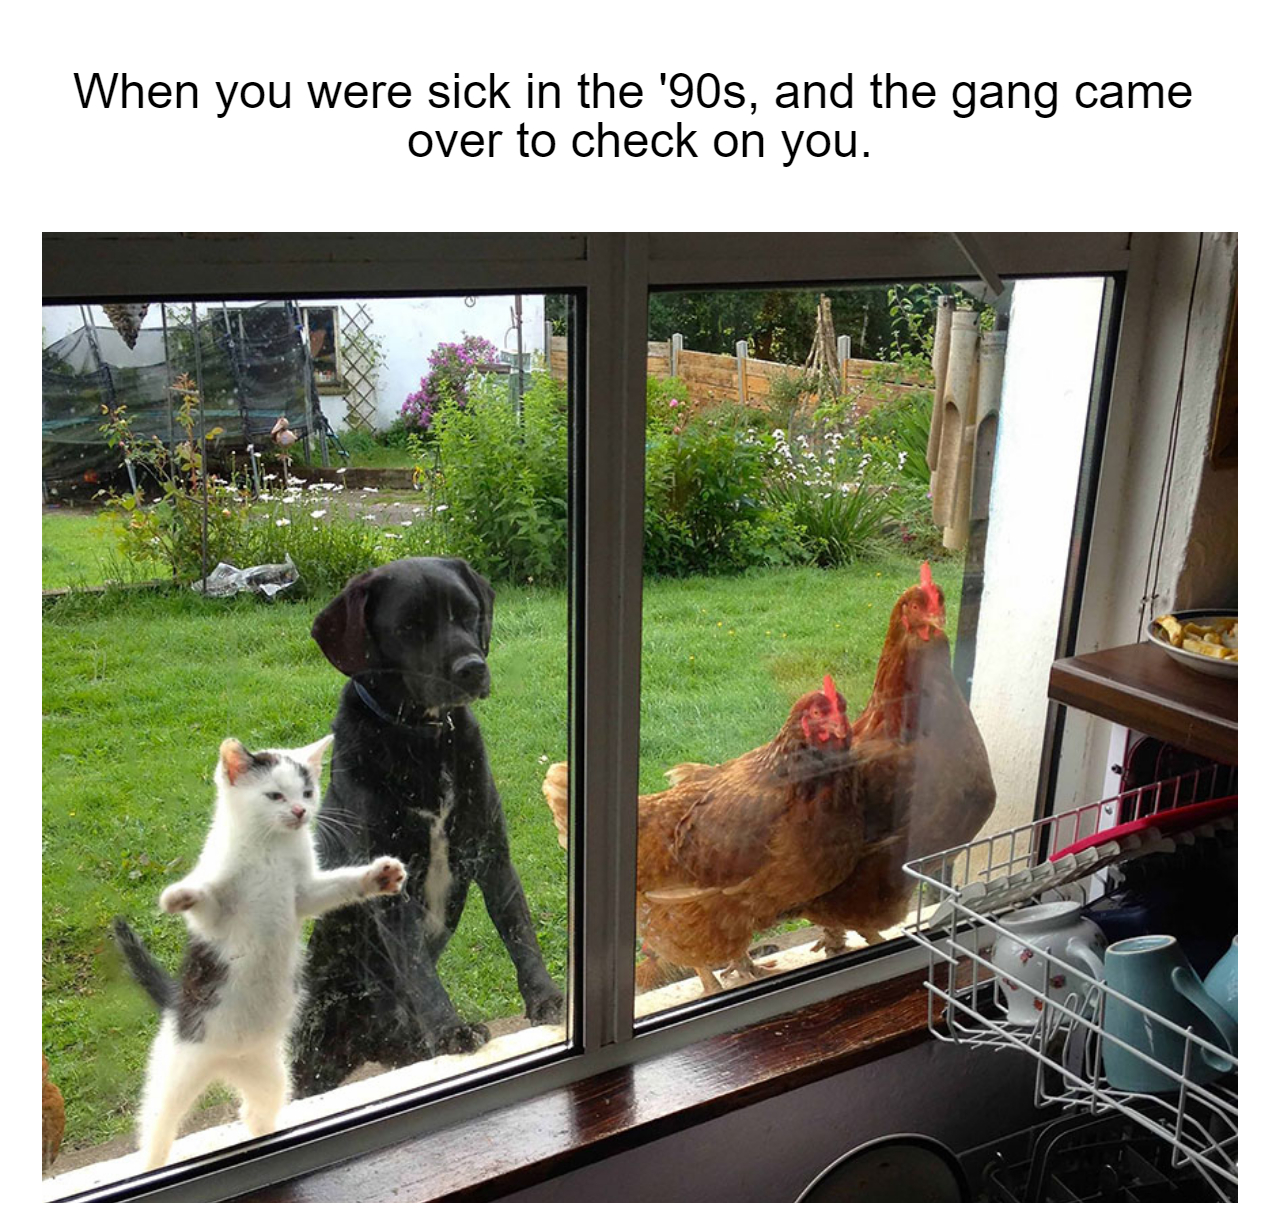 very funny pictures with captions - When you were sick in the '90s, and the gang came over to check on you.